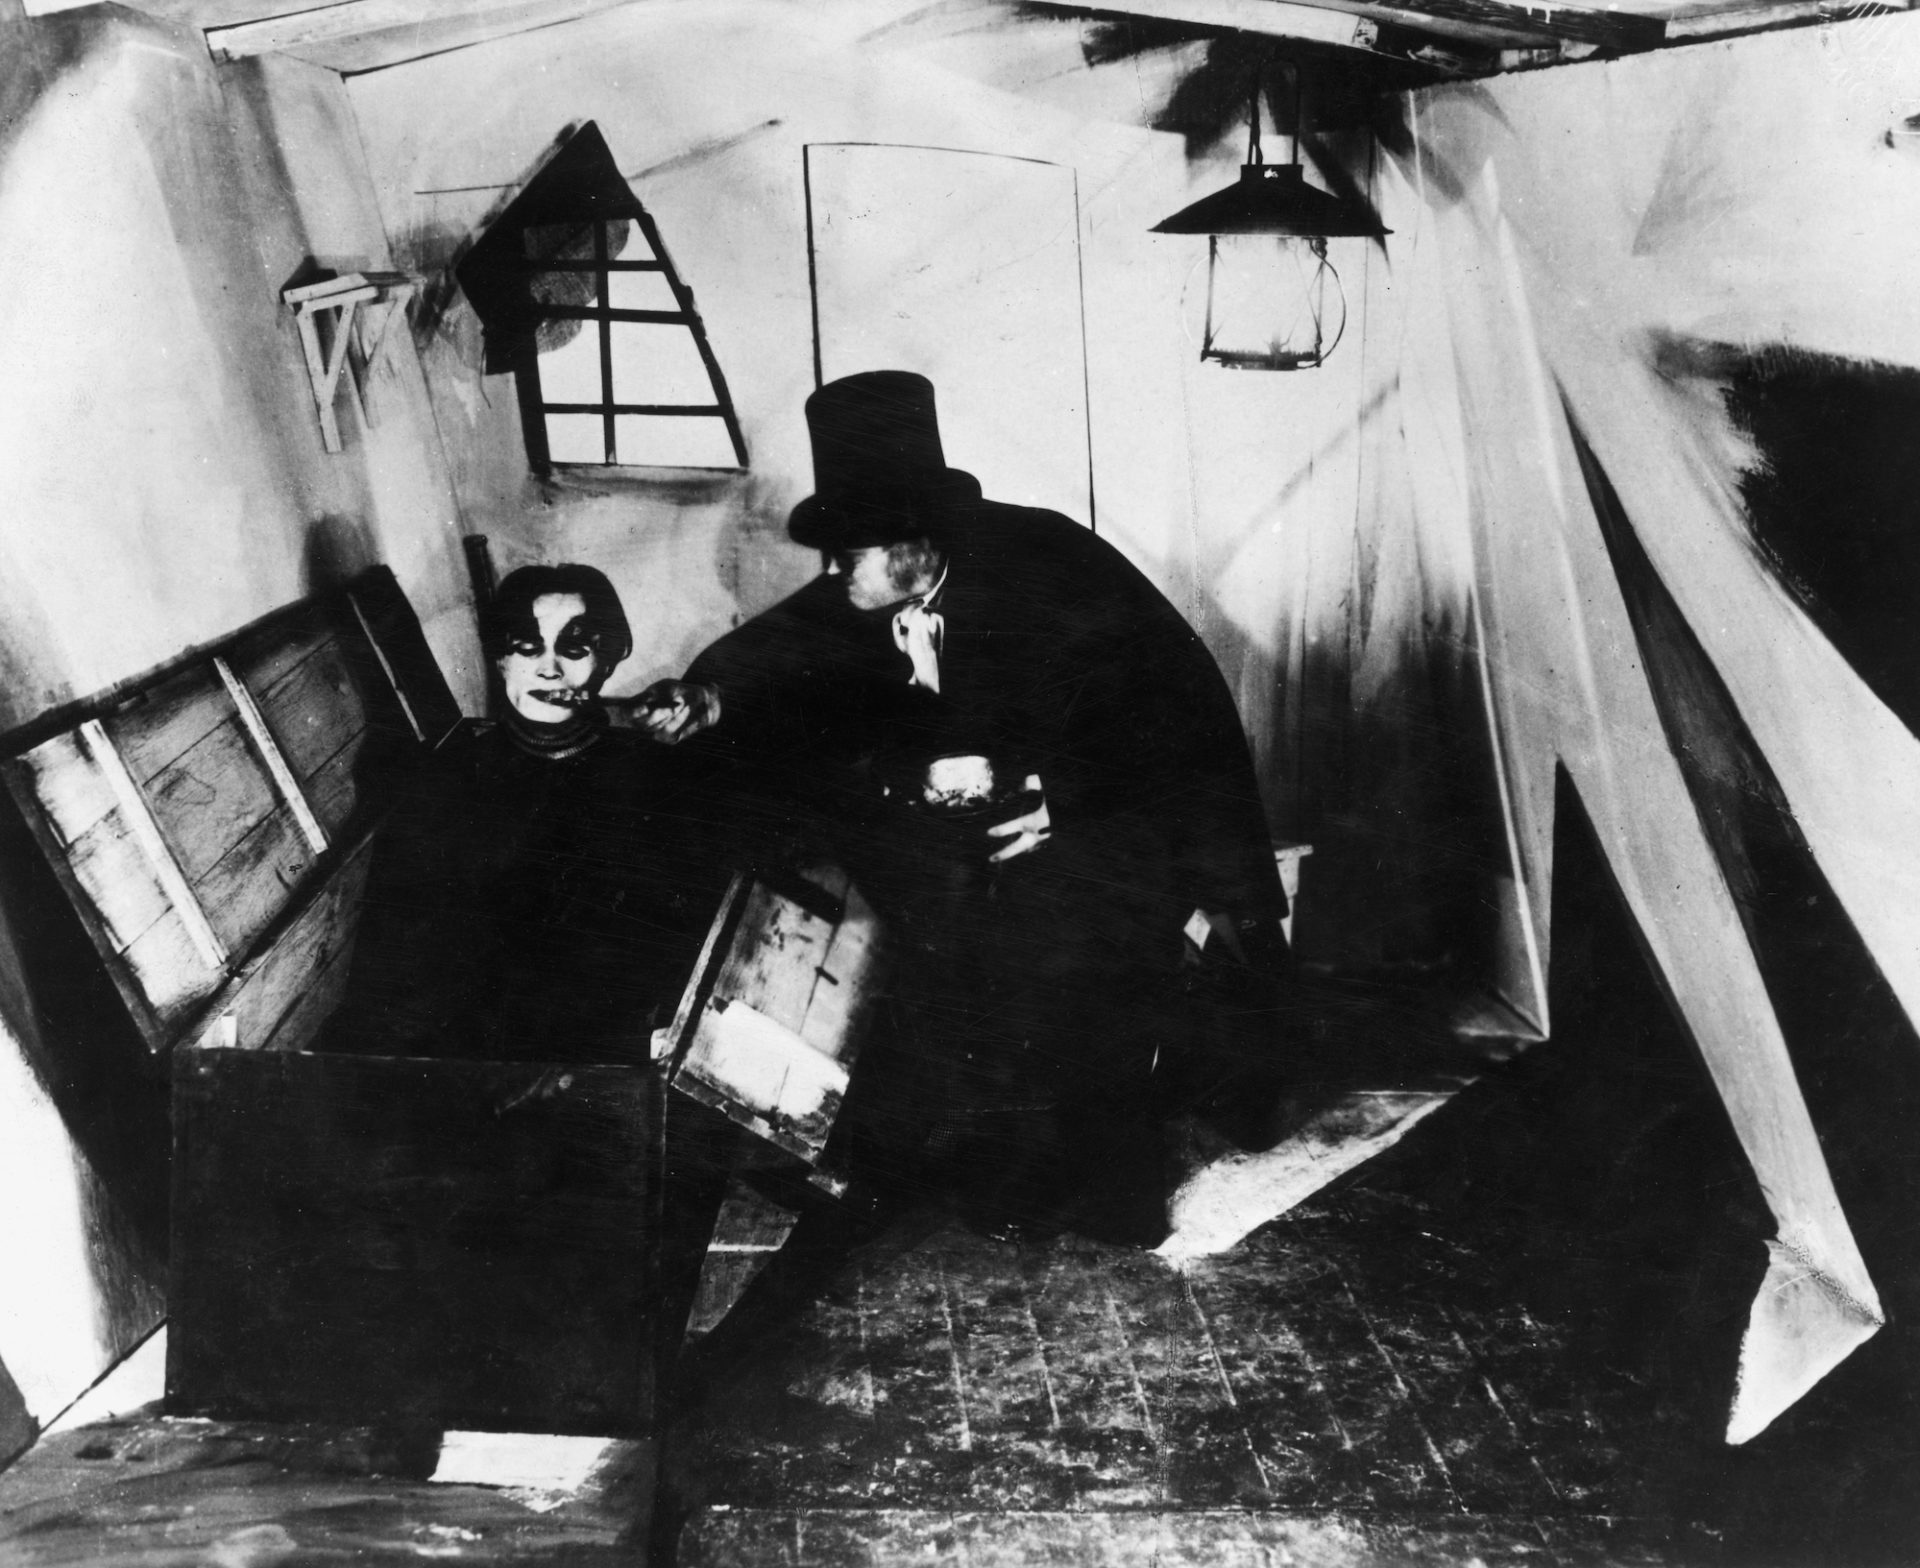 A scene from The Cabinet Of Dr Caligari in black and white shows a man in a top hat and black cape leaning over another man emerging from a casket